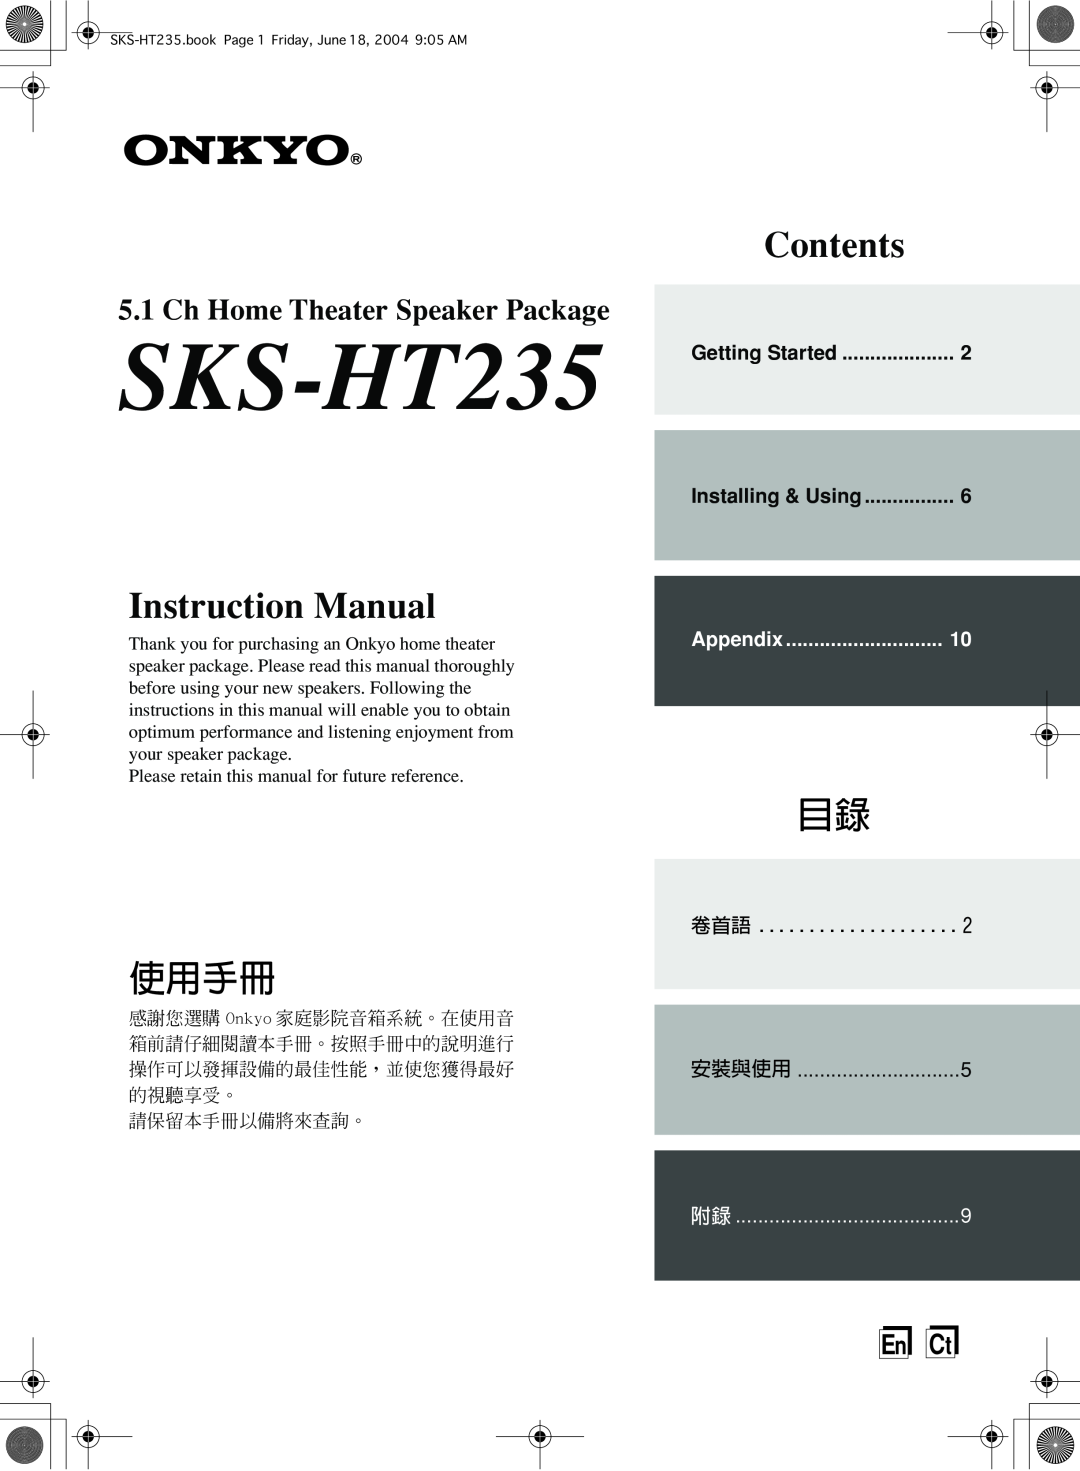 Onkyo SKS-HT235 appendix 使用手冊, Getting Started, Installing & Using, Instruction Manual, Contents, EnCt, Appendix 